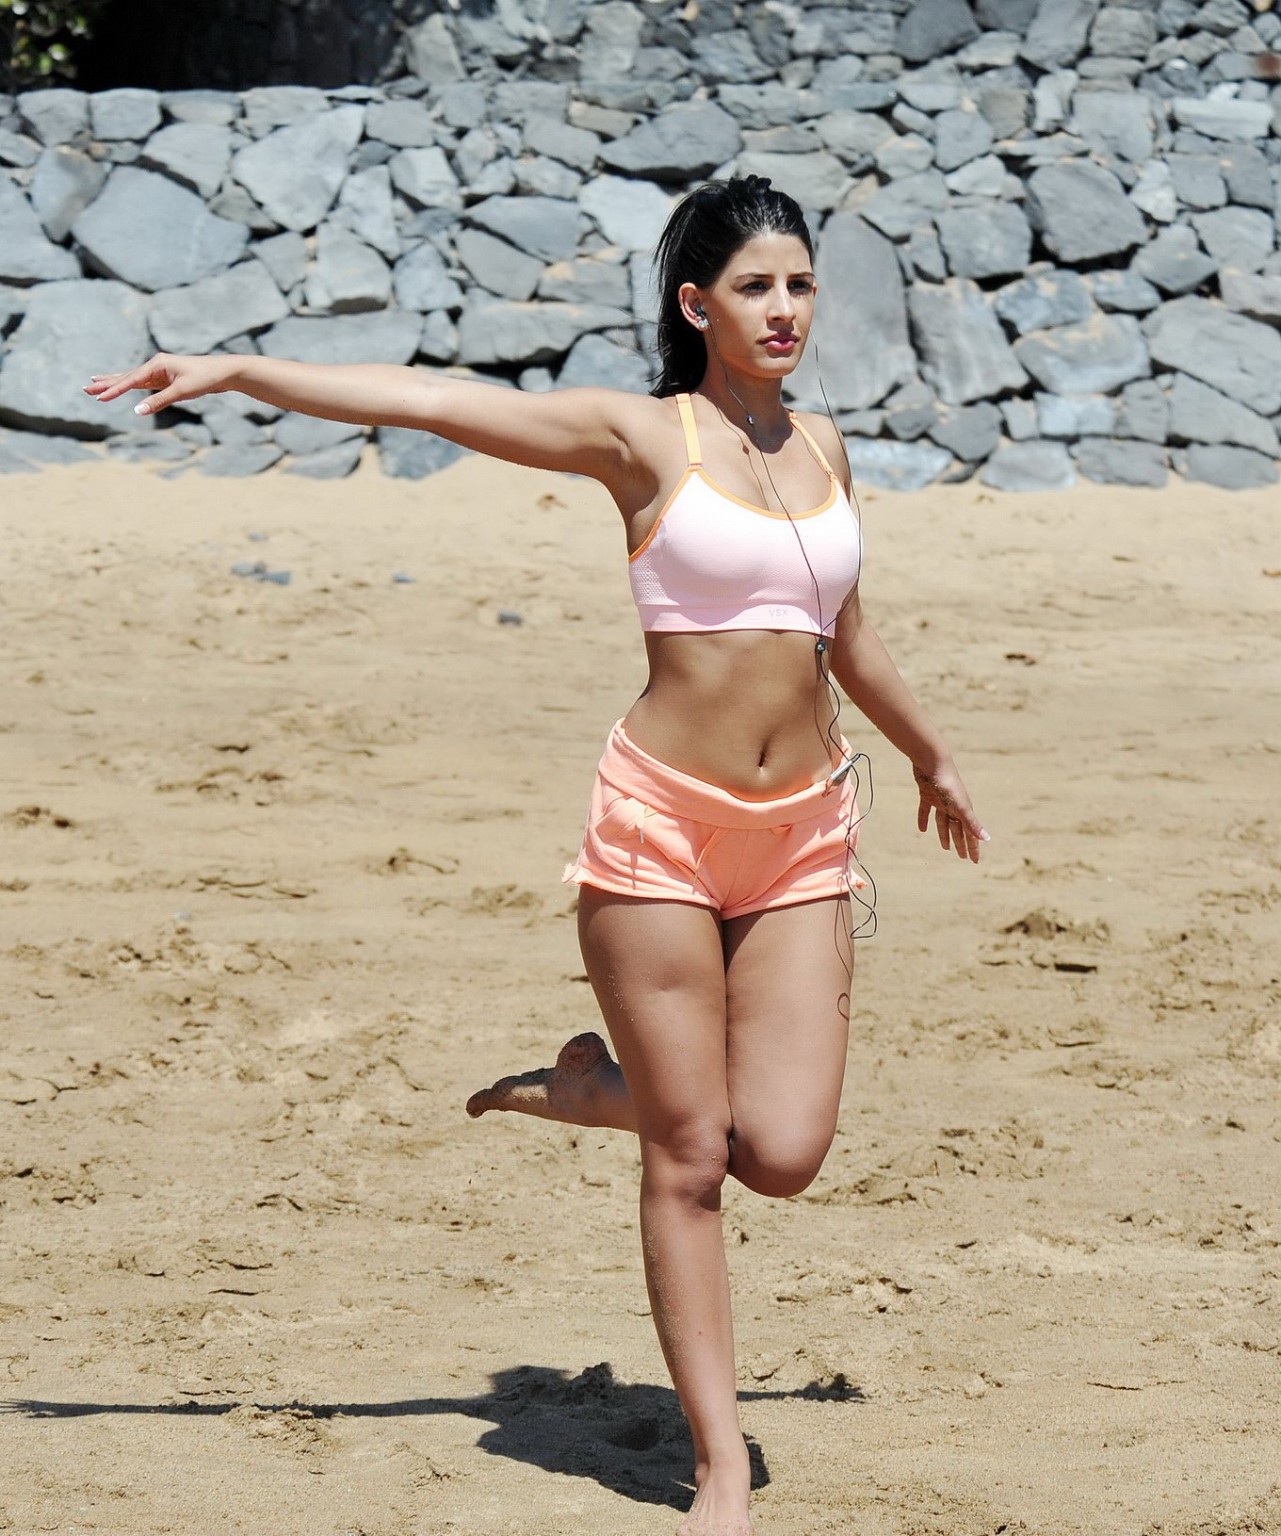 Jasmin Walia busty and shows her ass while workout on the beach in Tenerife #75195190